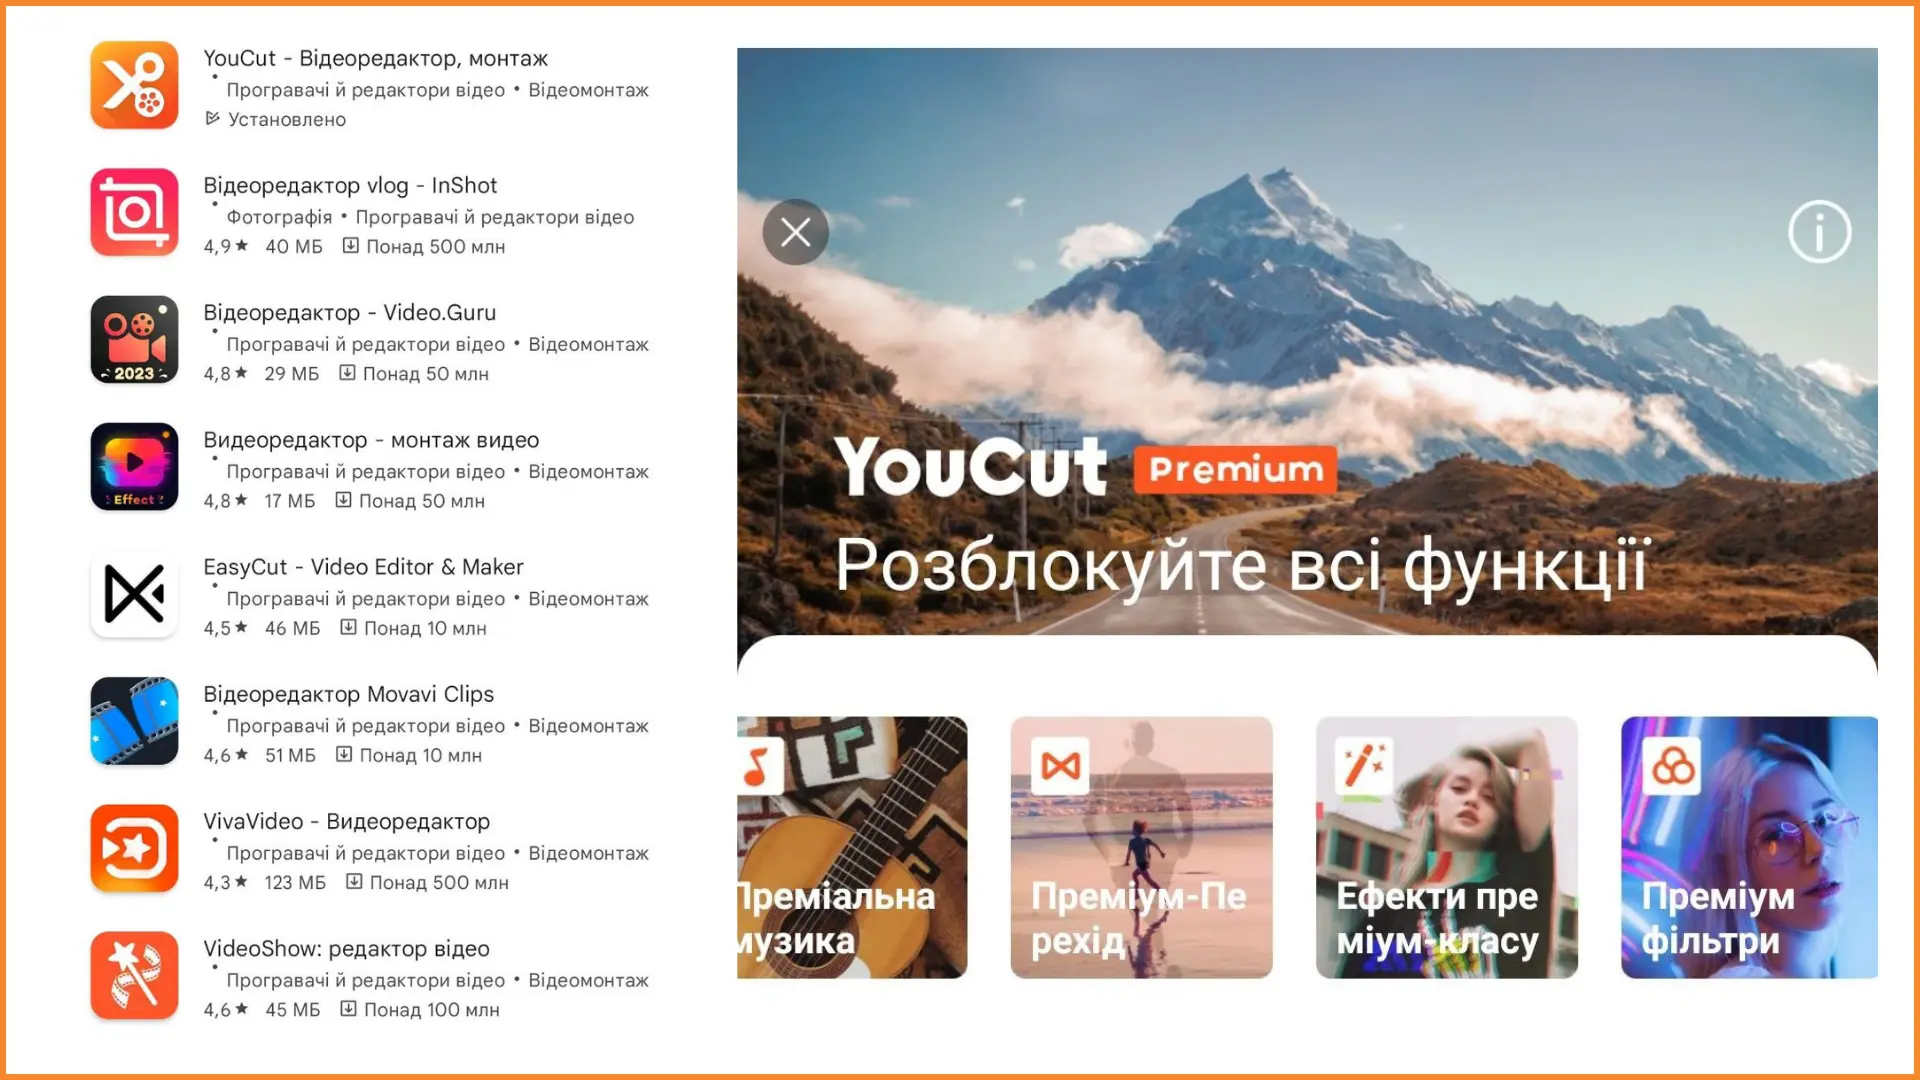 Play market programs for video - YouCut